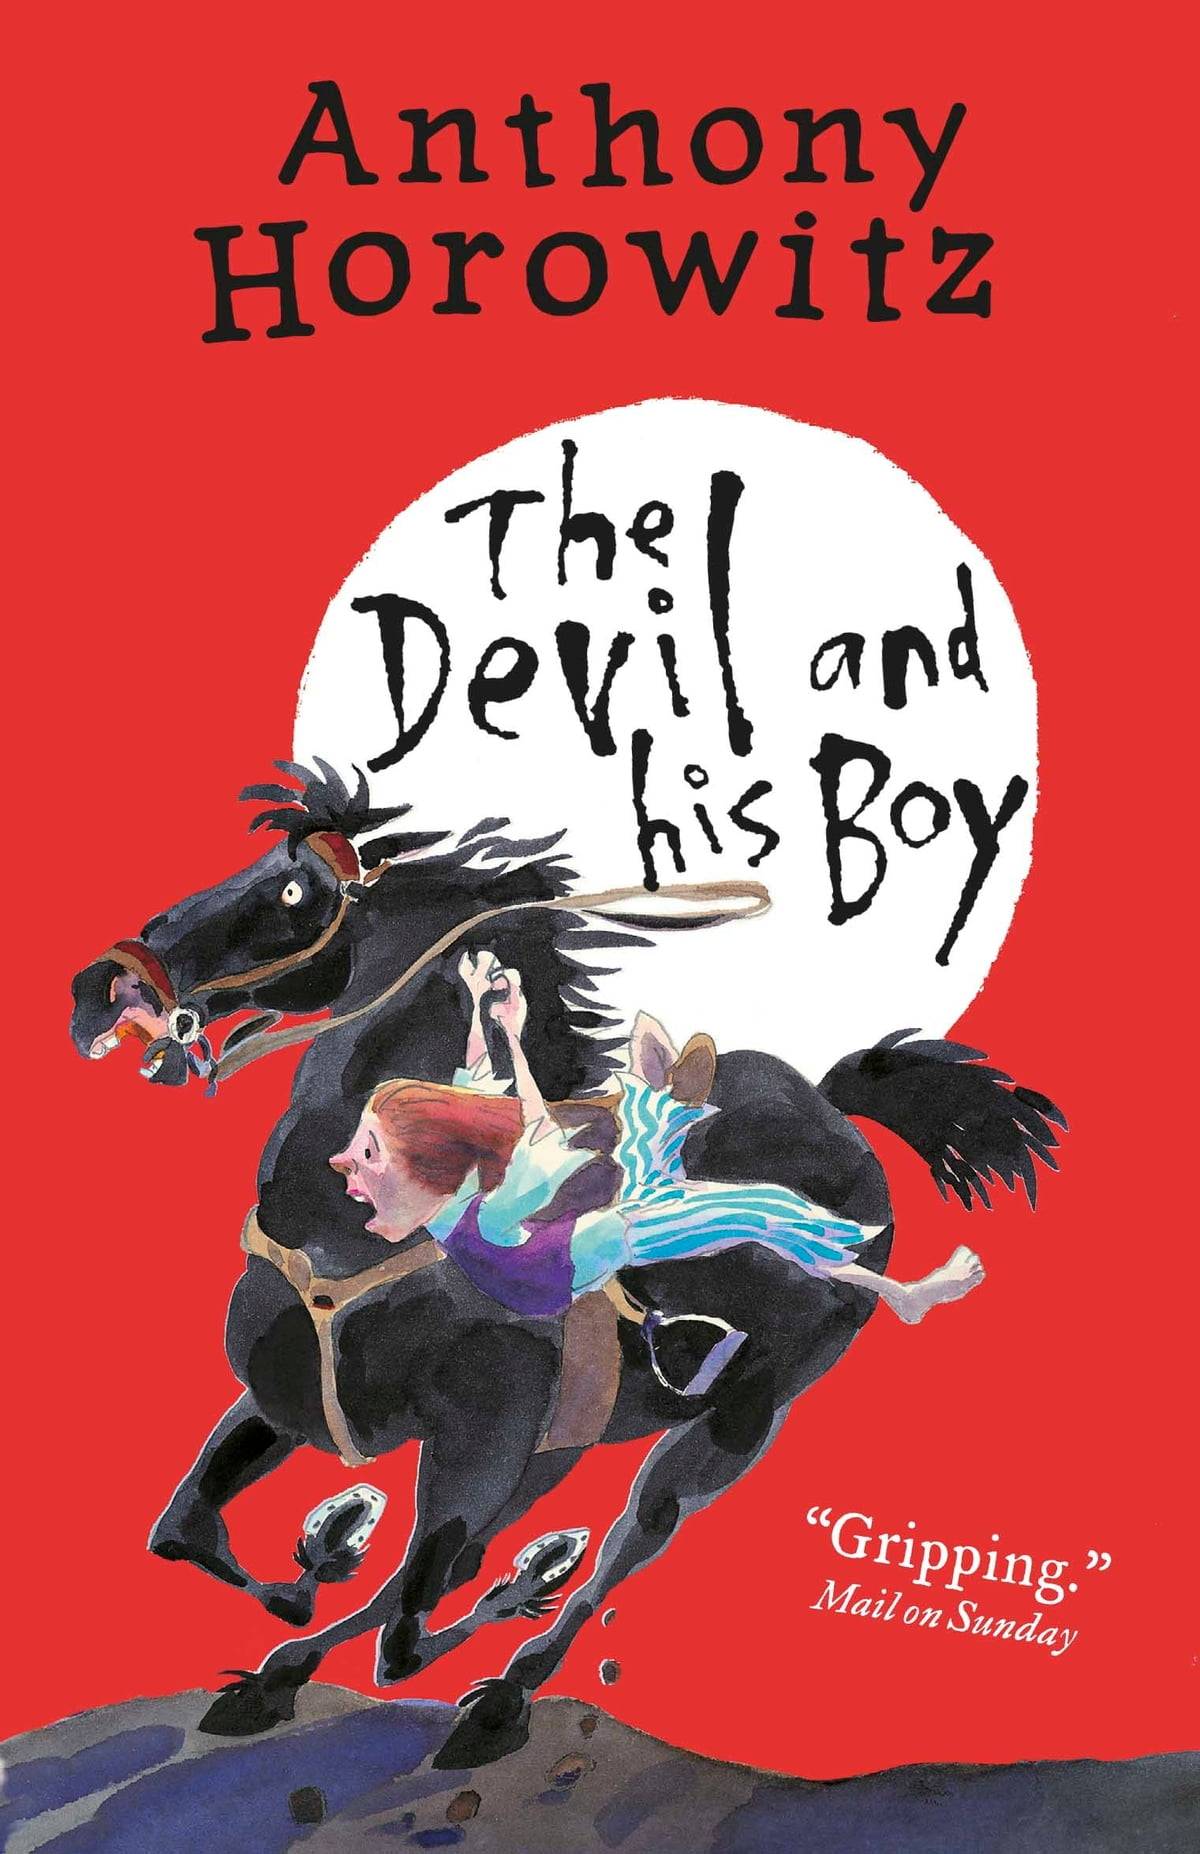 IMG : The Devil and his Boy